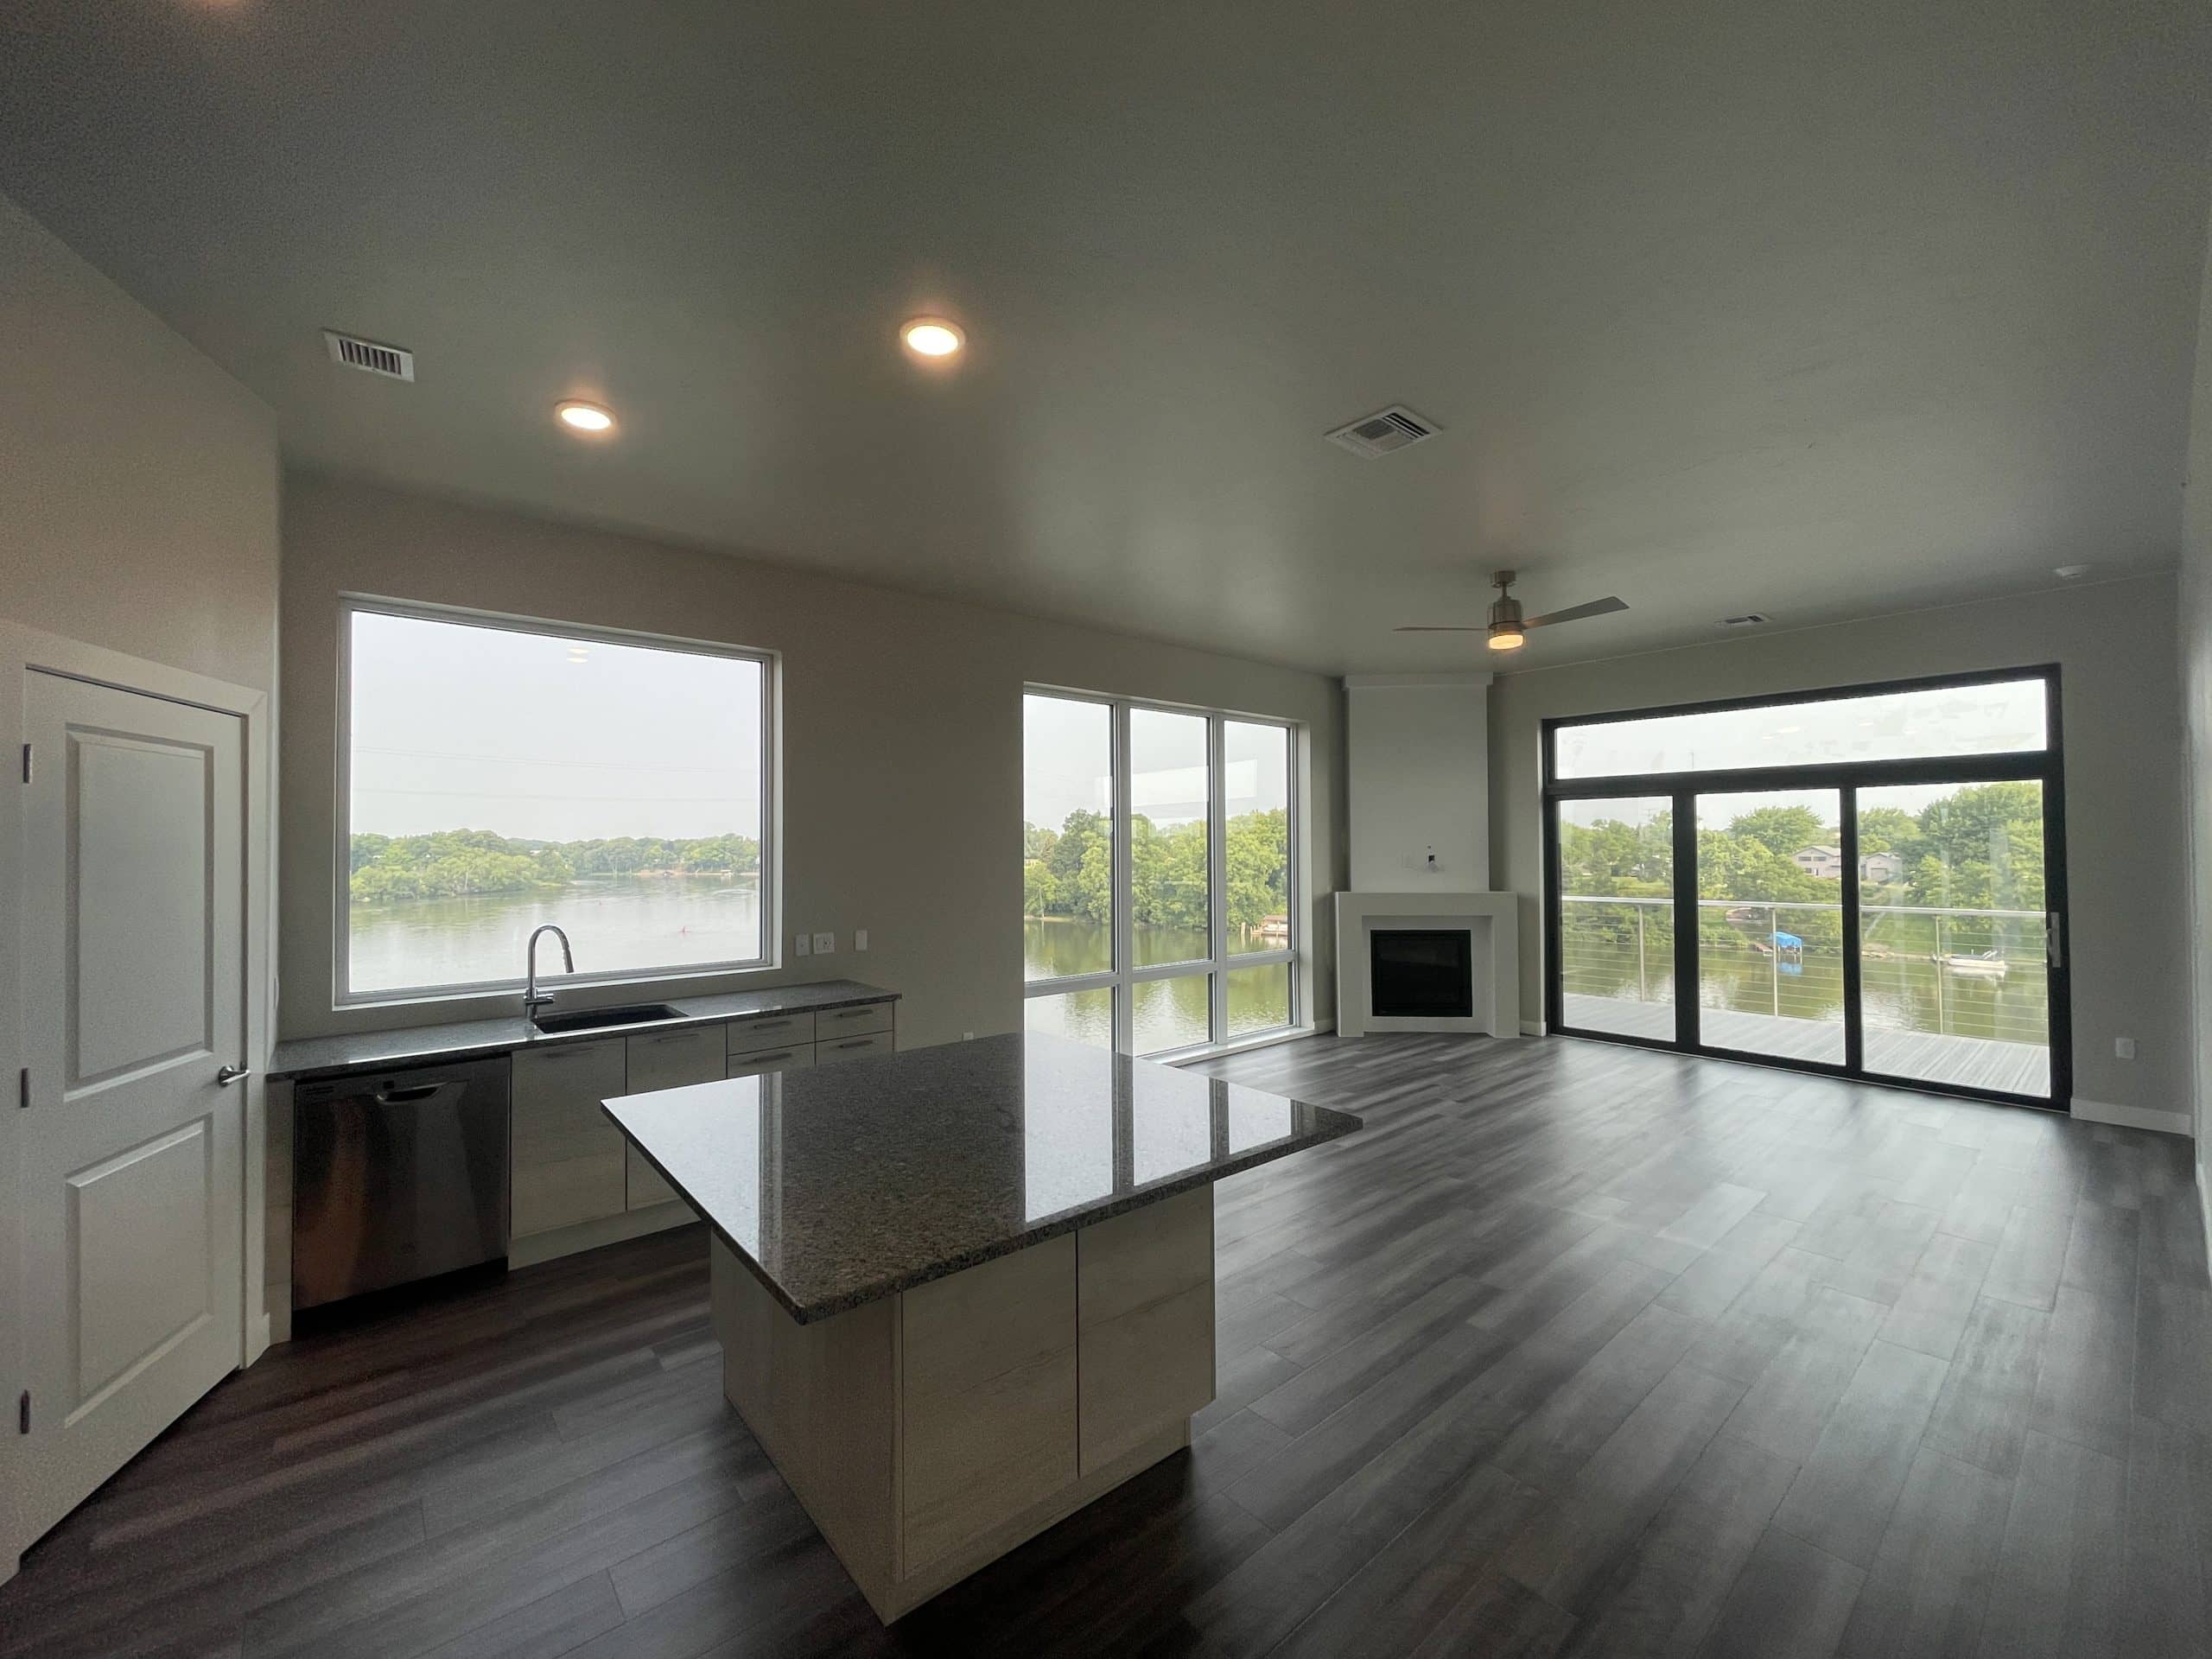 3 Bedroom Condo Kitchen at THE CURRENT of the Fox - Kimberly